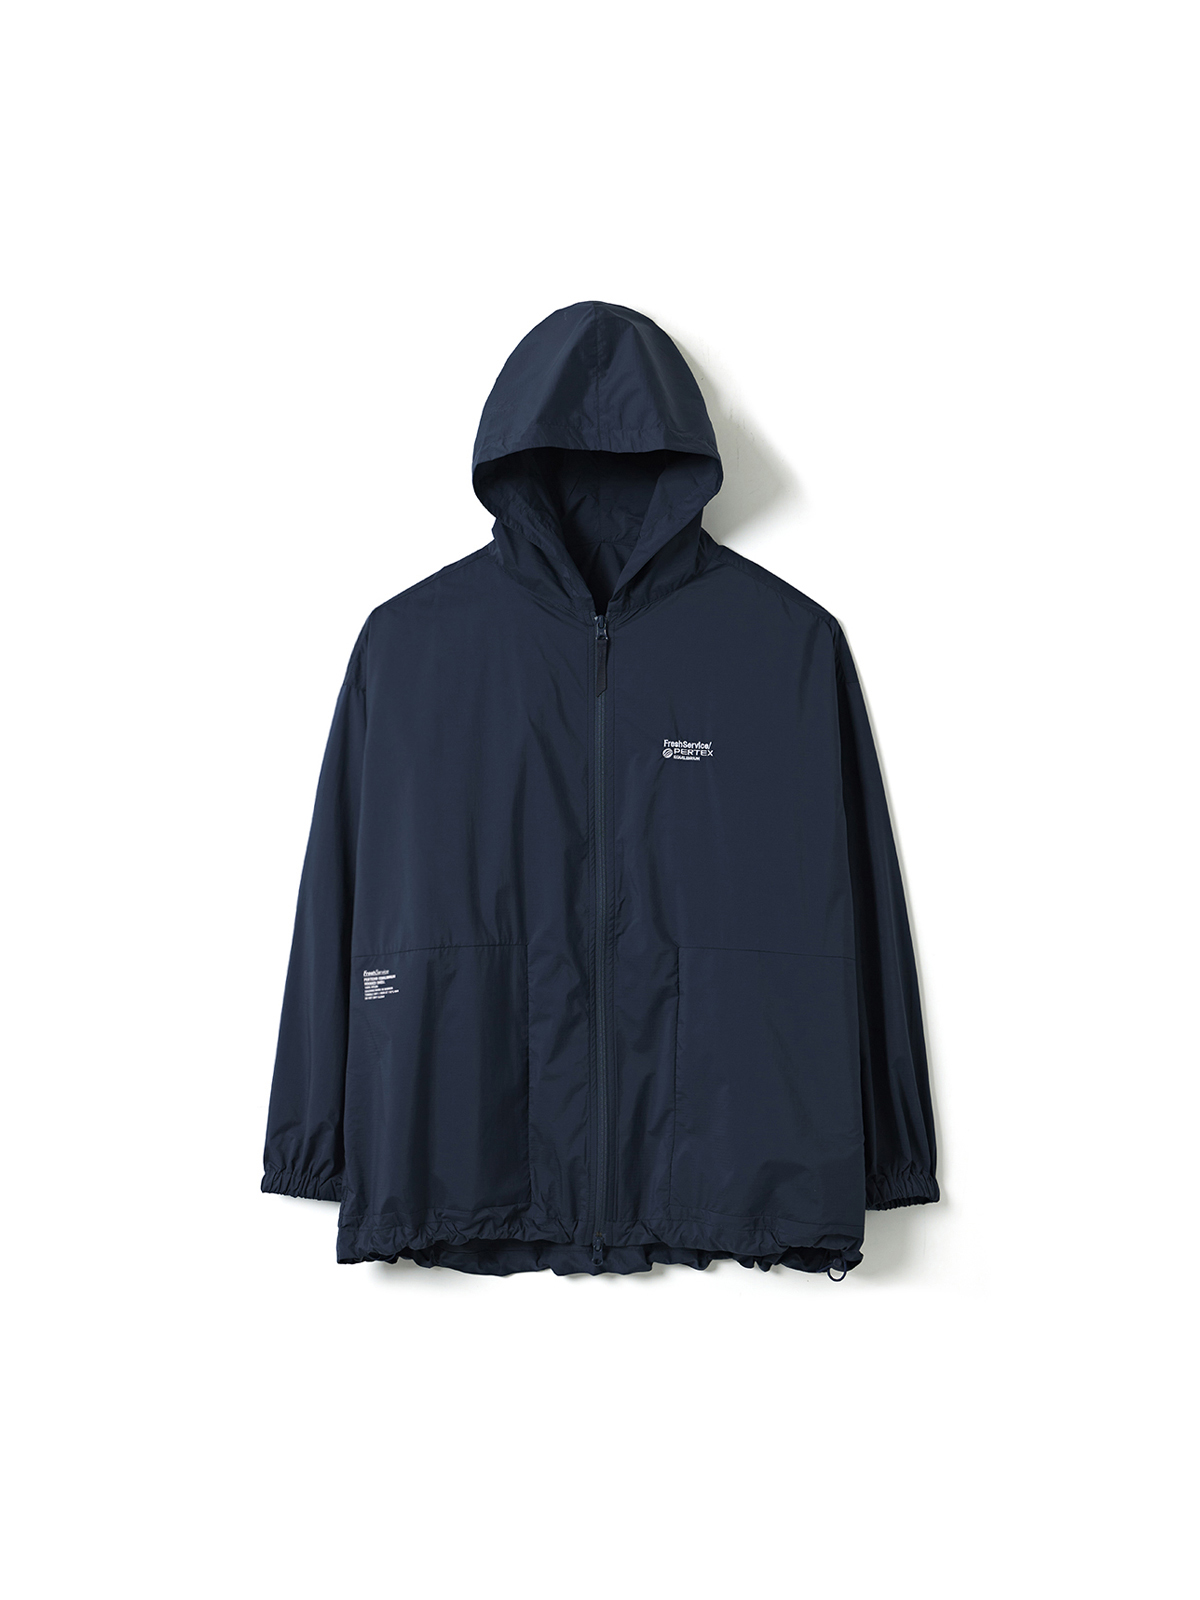 PERTEX EQUILIBRIUM HOODED SHELL (NAVY)